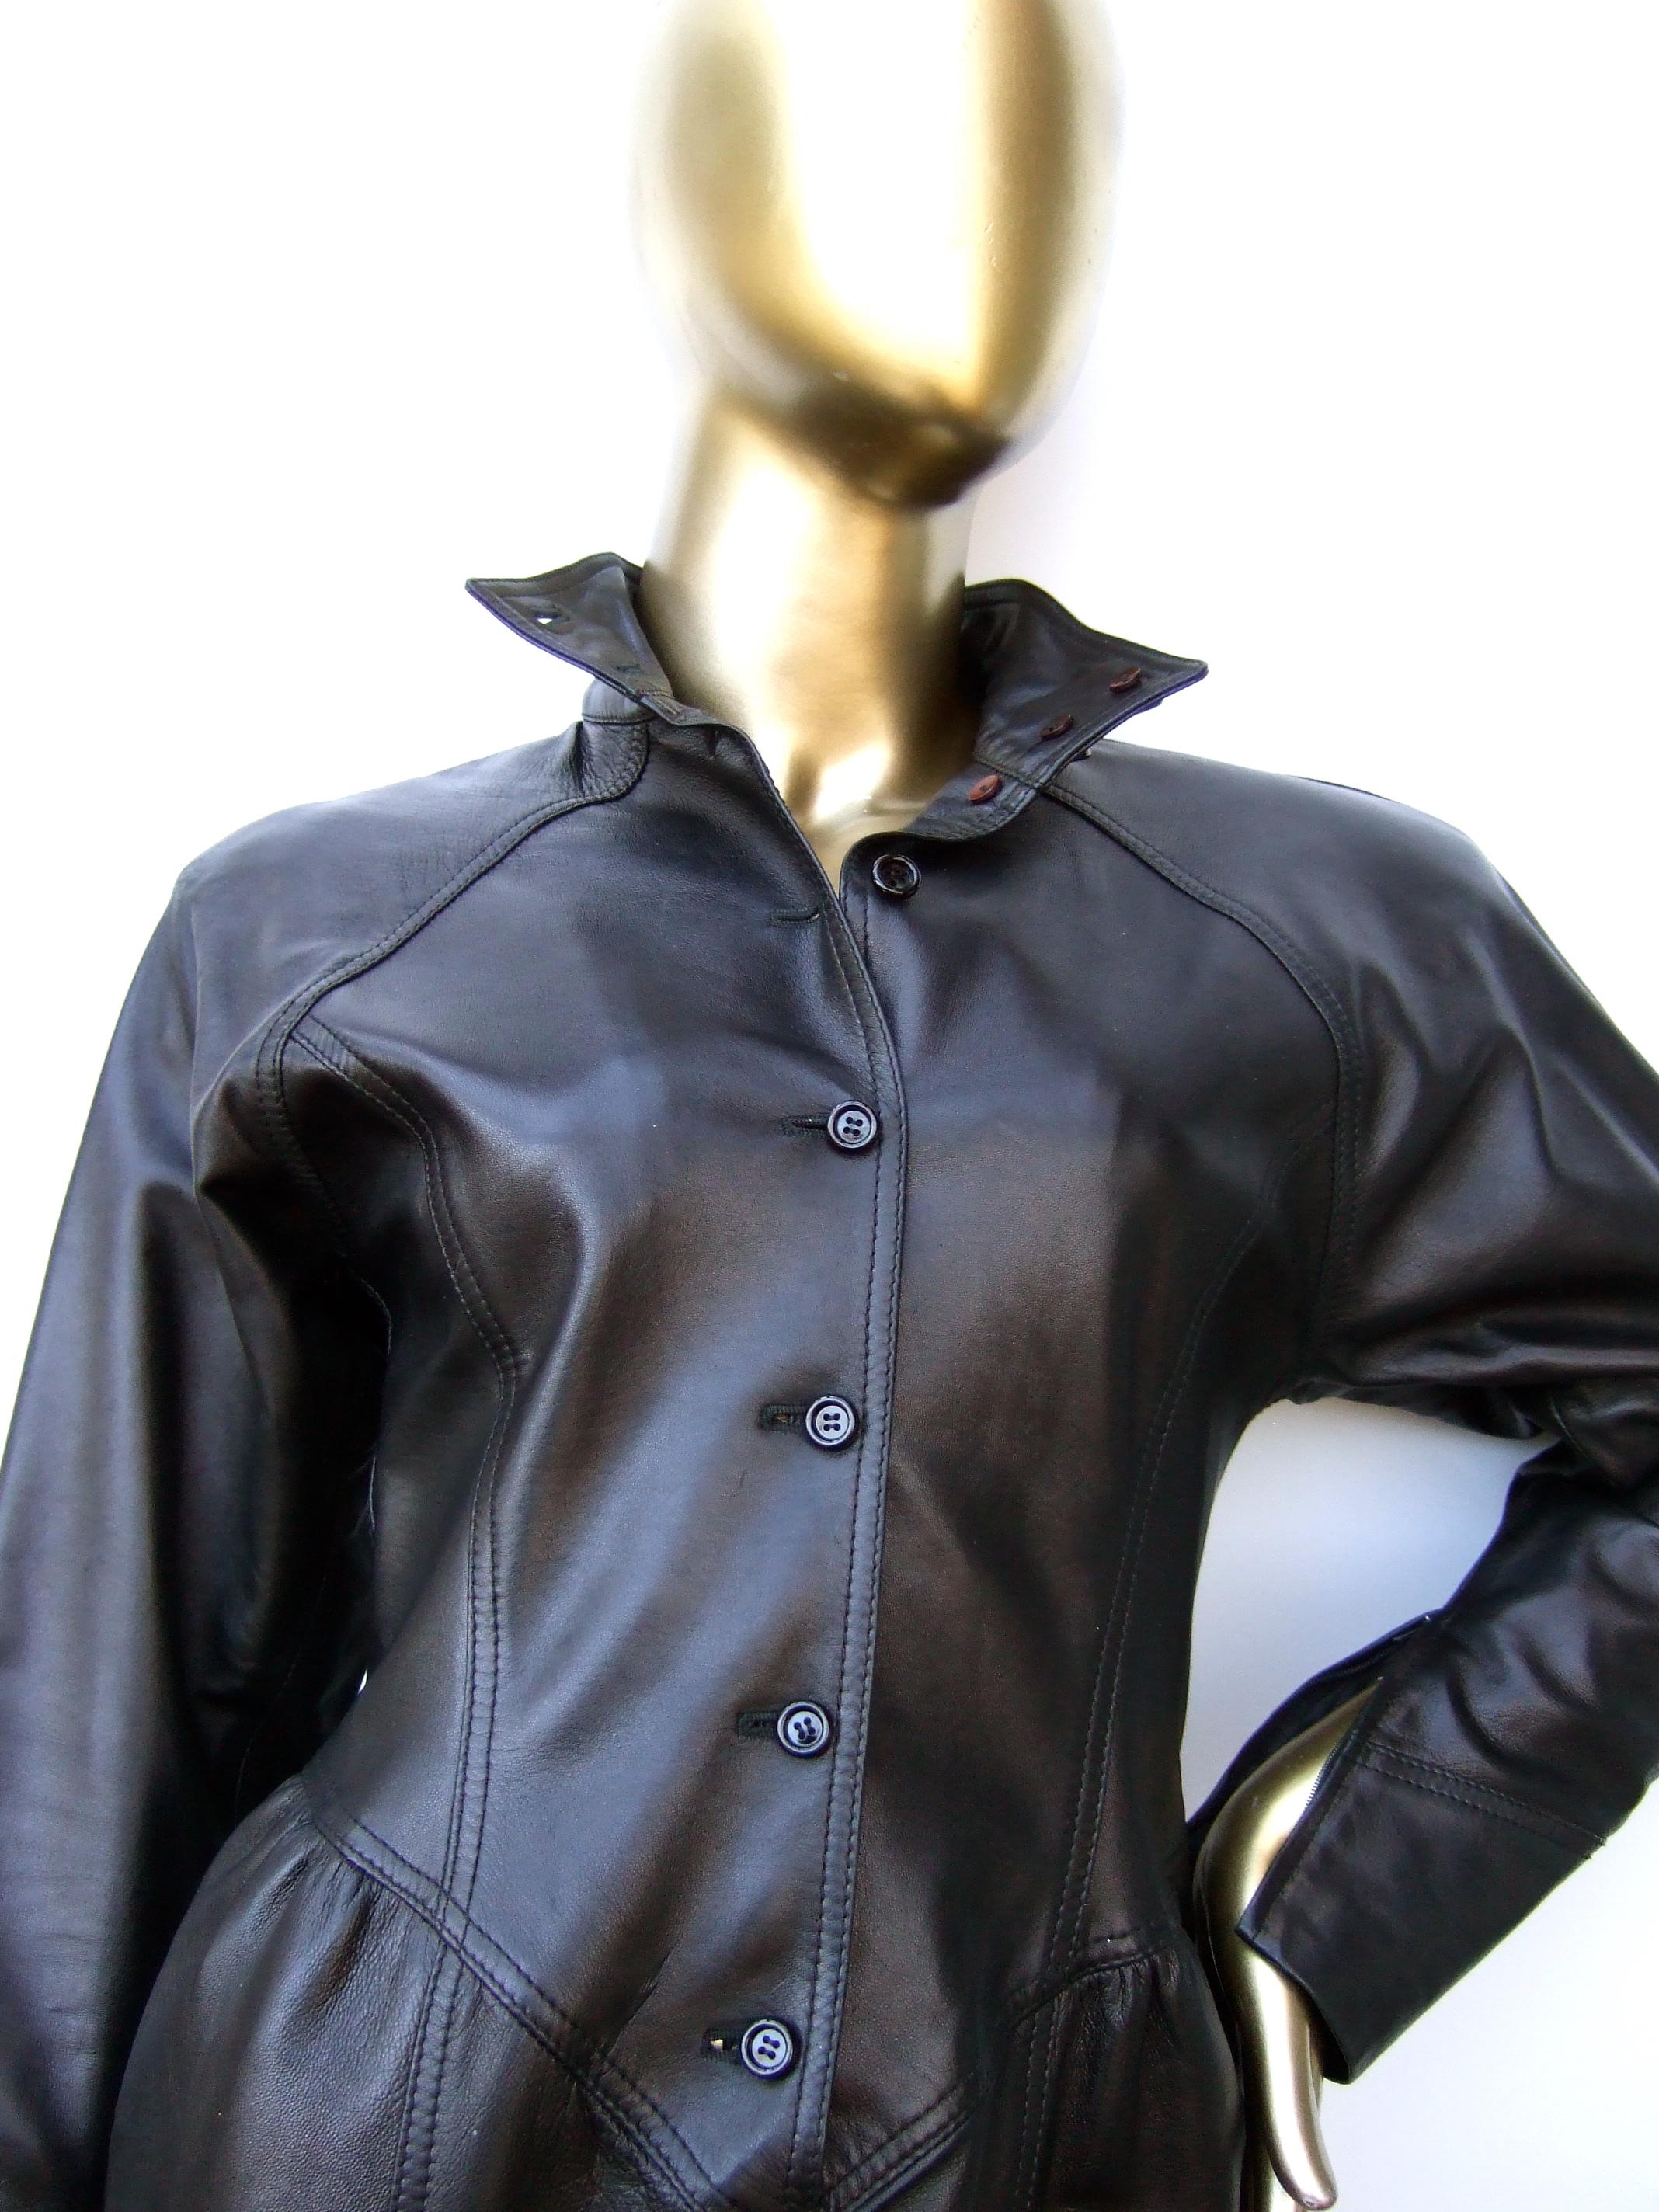 Emanuel Ungaro Paris Avant-garde Edgy Brown Leather Dress Made in Italy c 1980s For Sale 6